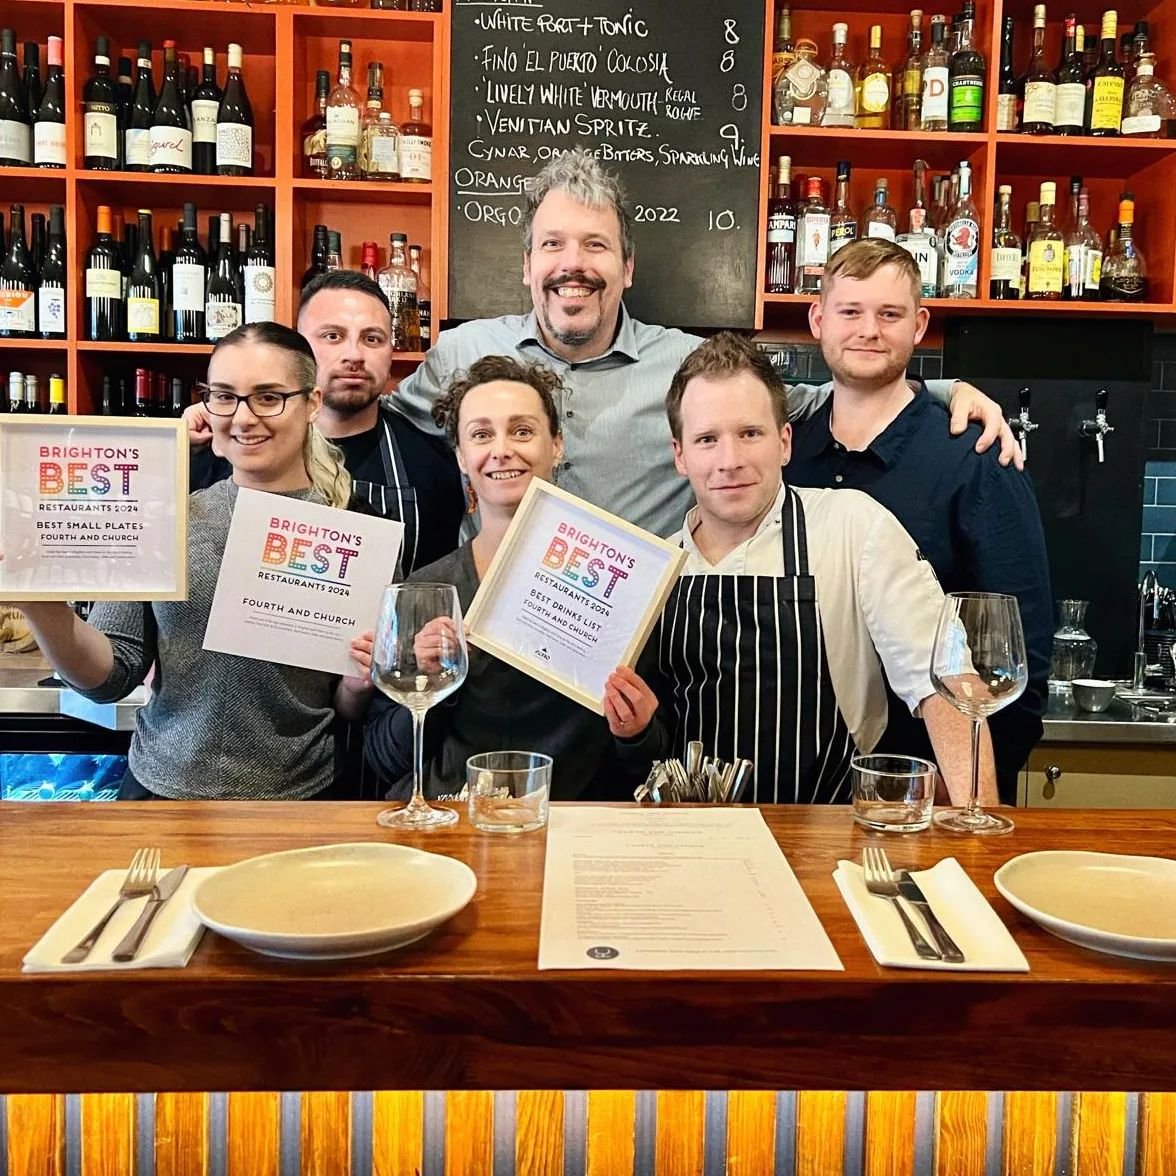 The dust has finally settled, following a fantastic Monday night hosted by @brightonsbestrestaurants

Another fantastic evening, celebrating the local restaurant scene within Brighton &amp;Hove.

We were completely caught off-guard to be included in 